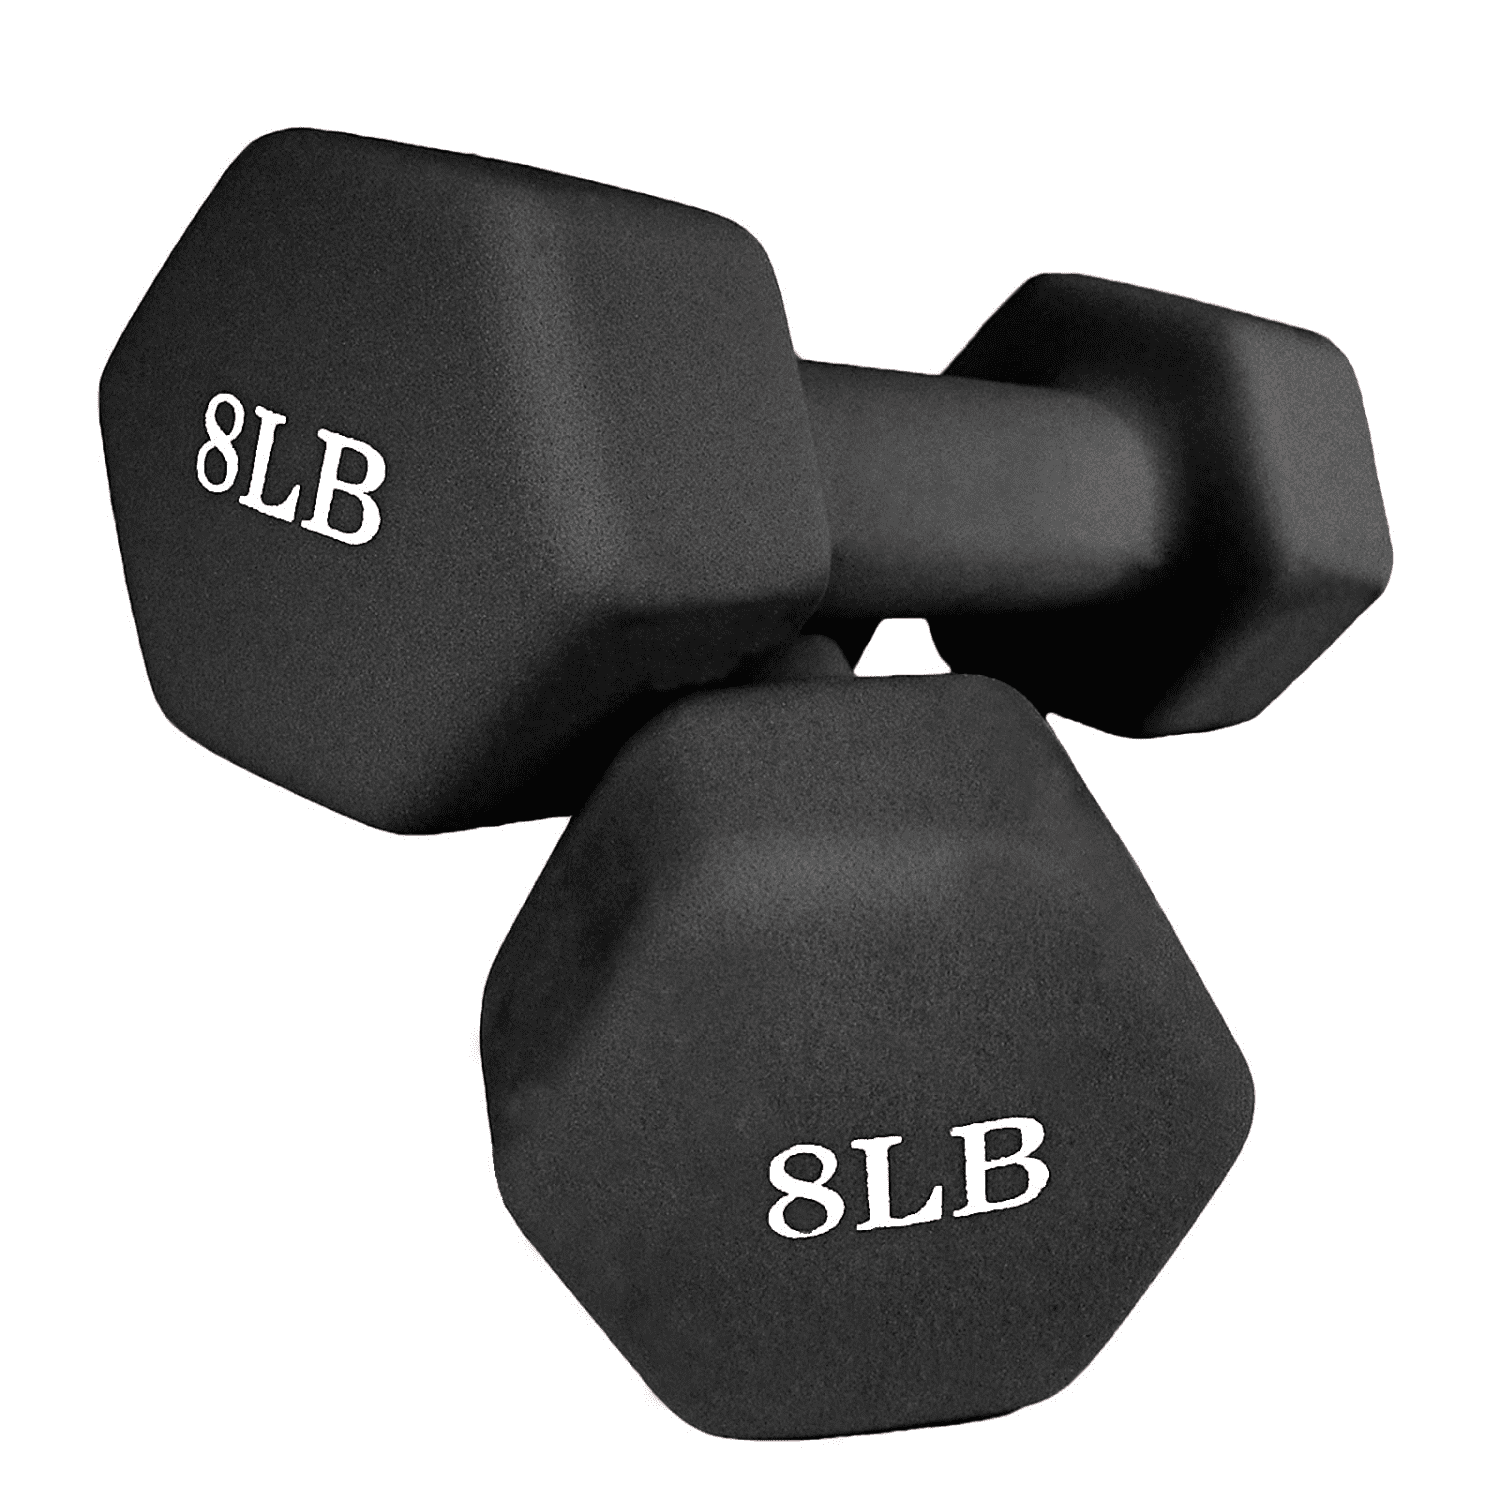 2LB & 3lb Set Rubber Neoprene Dumbbell Weights Fitness 10lbs Total 